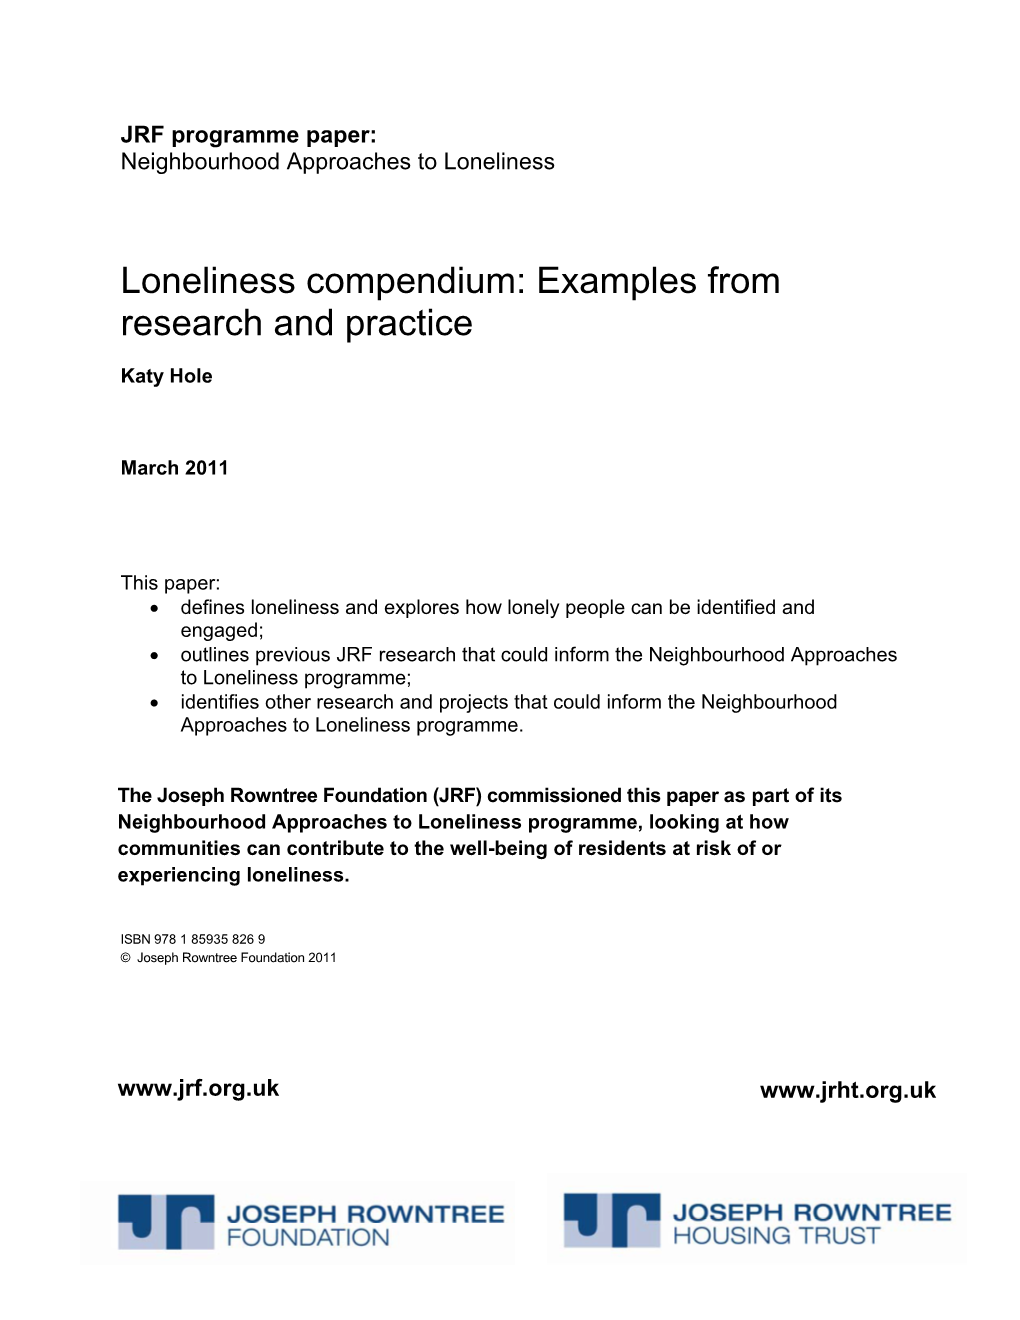 Loneliness Compendium: Examples from Research and Practice